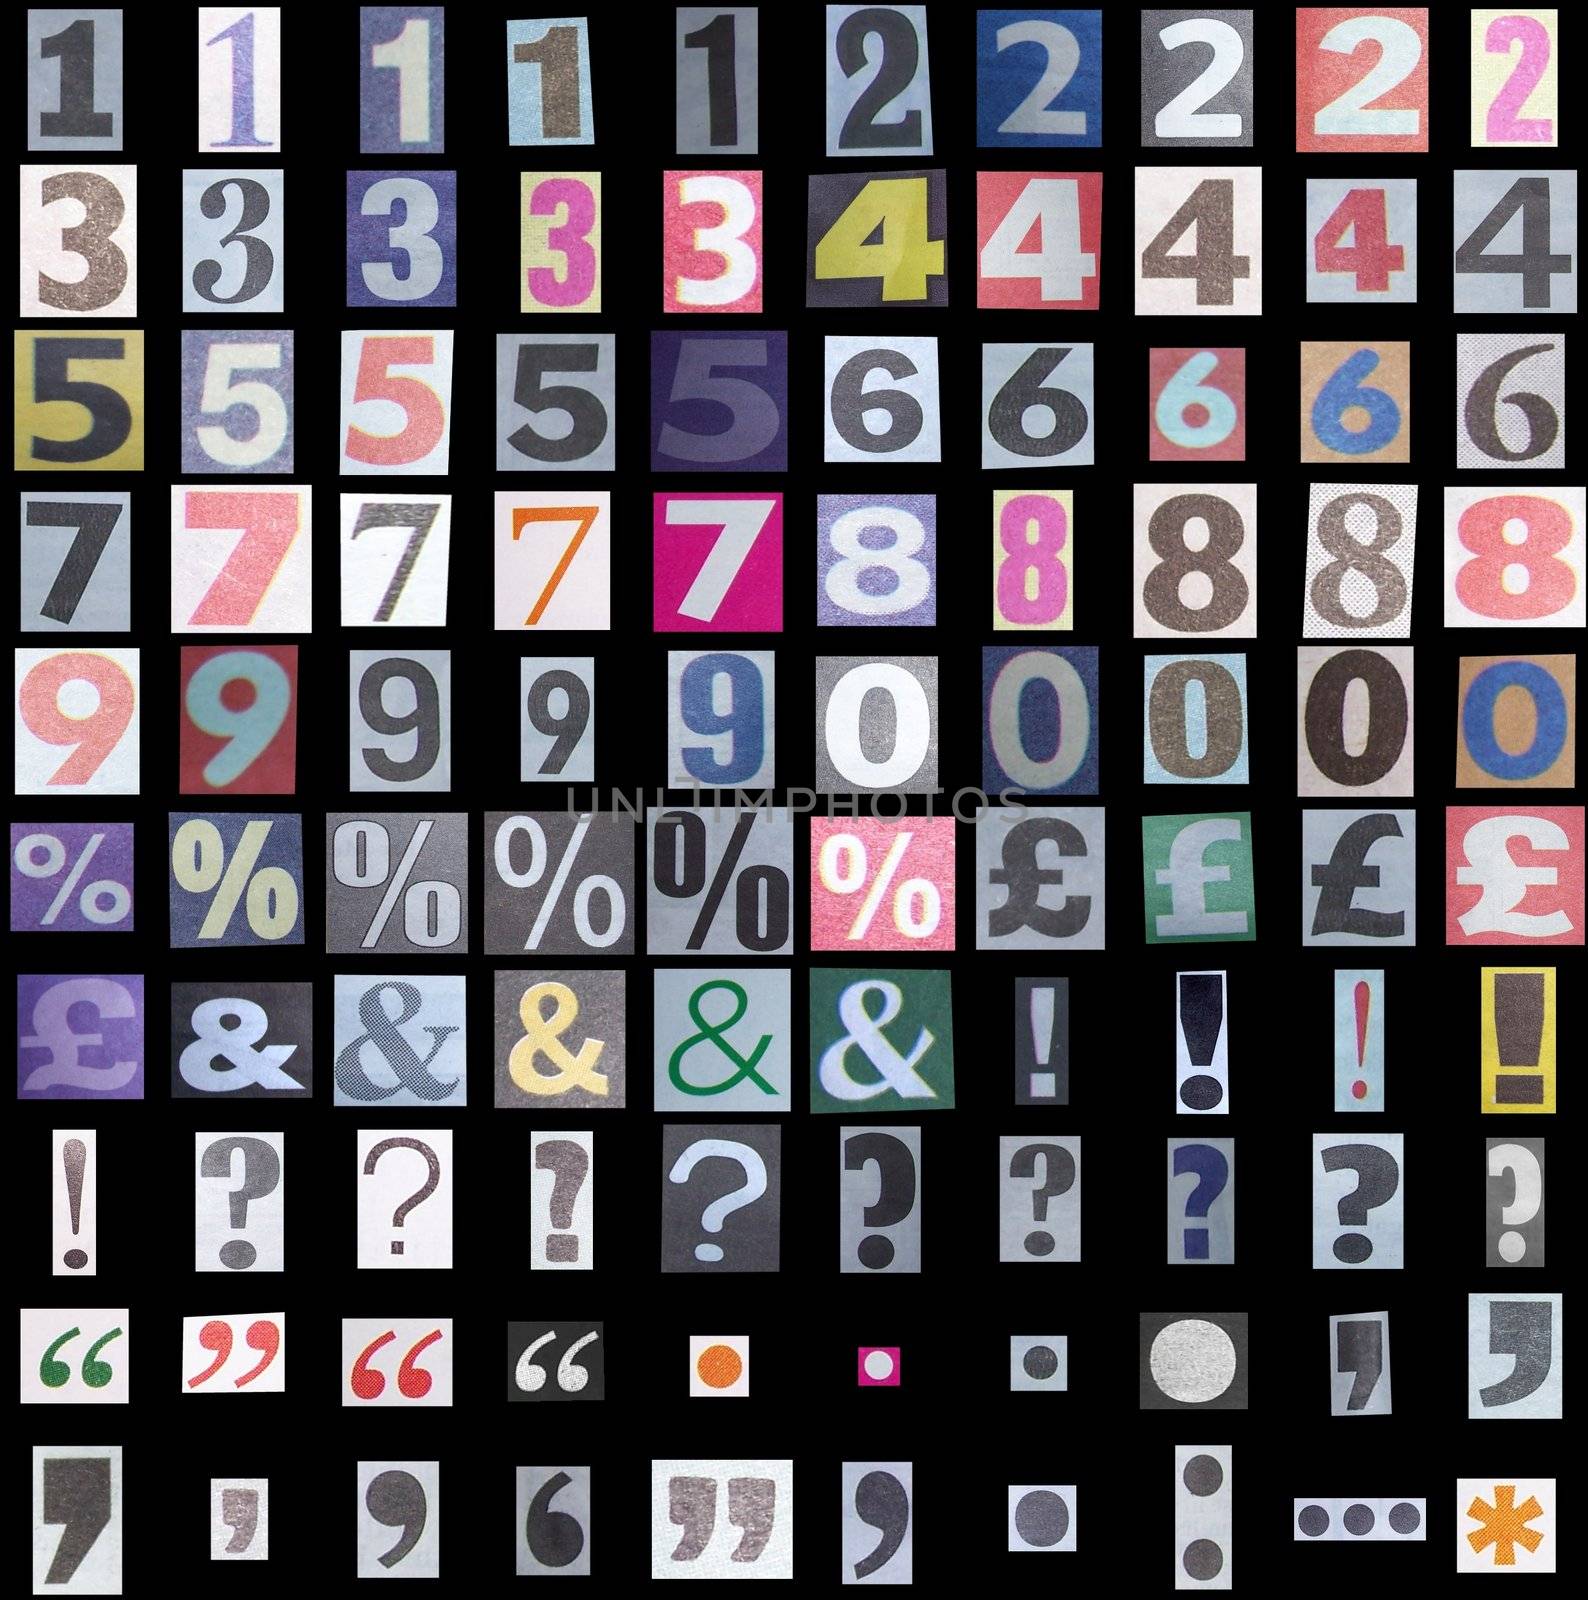 Newspaper symbols and numbers over a black background